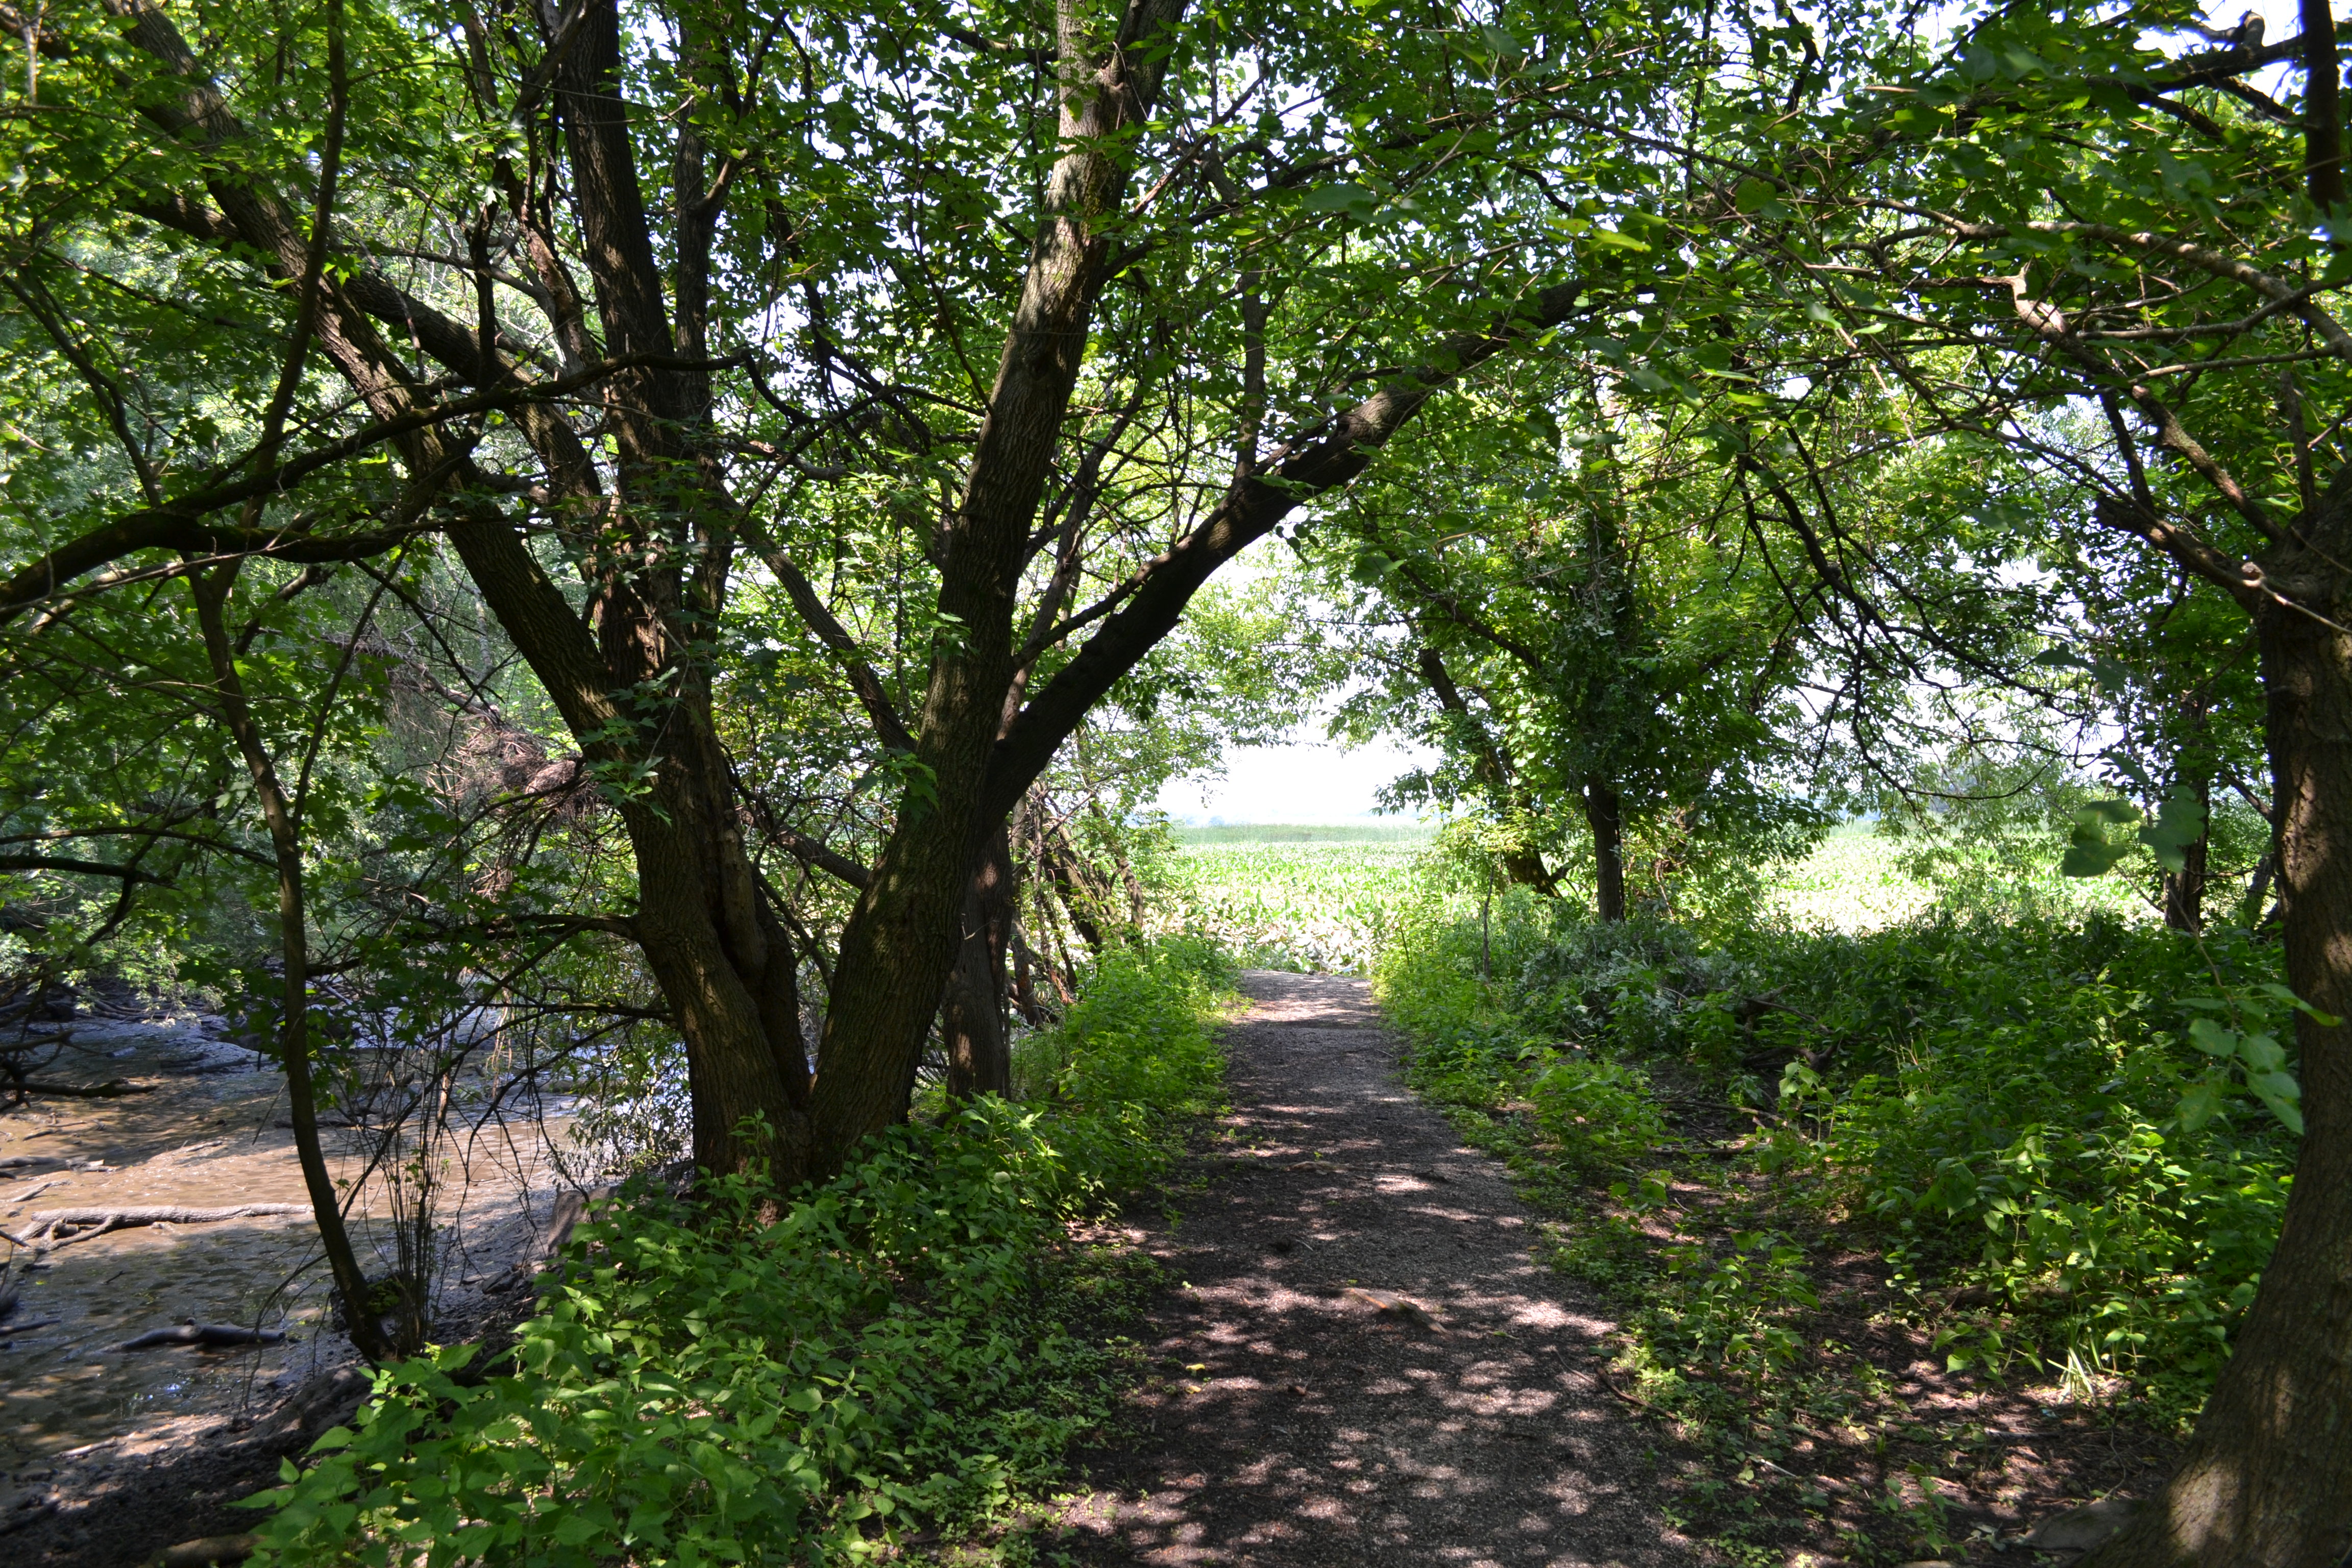 In some places shady trails lead to the seemingly endless marsh